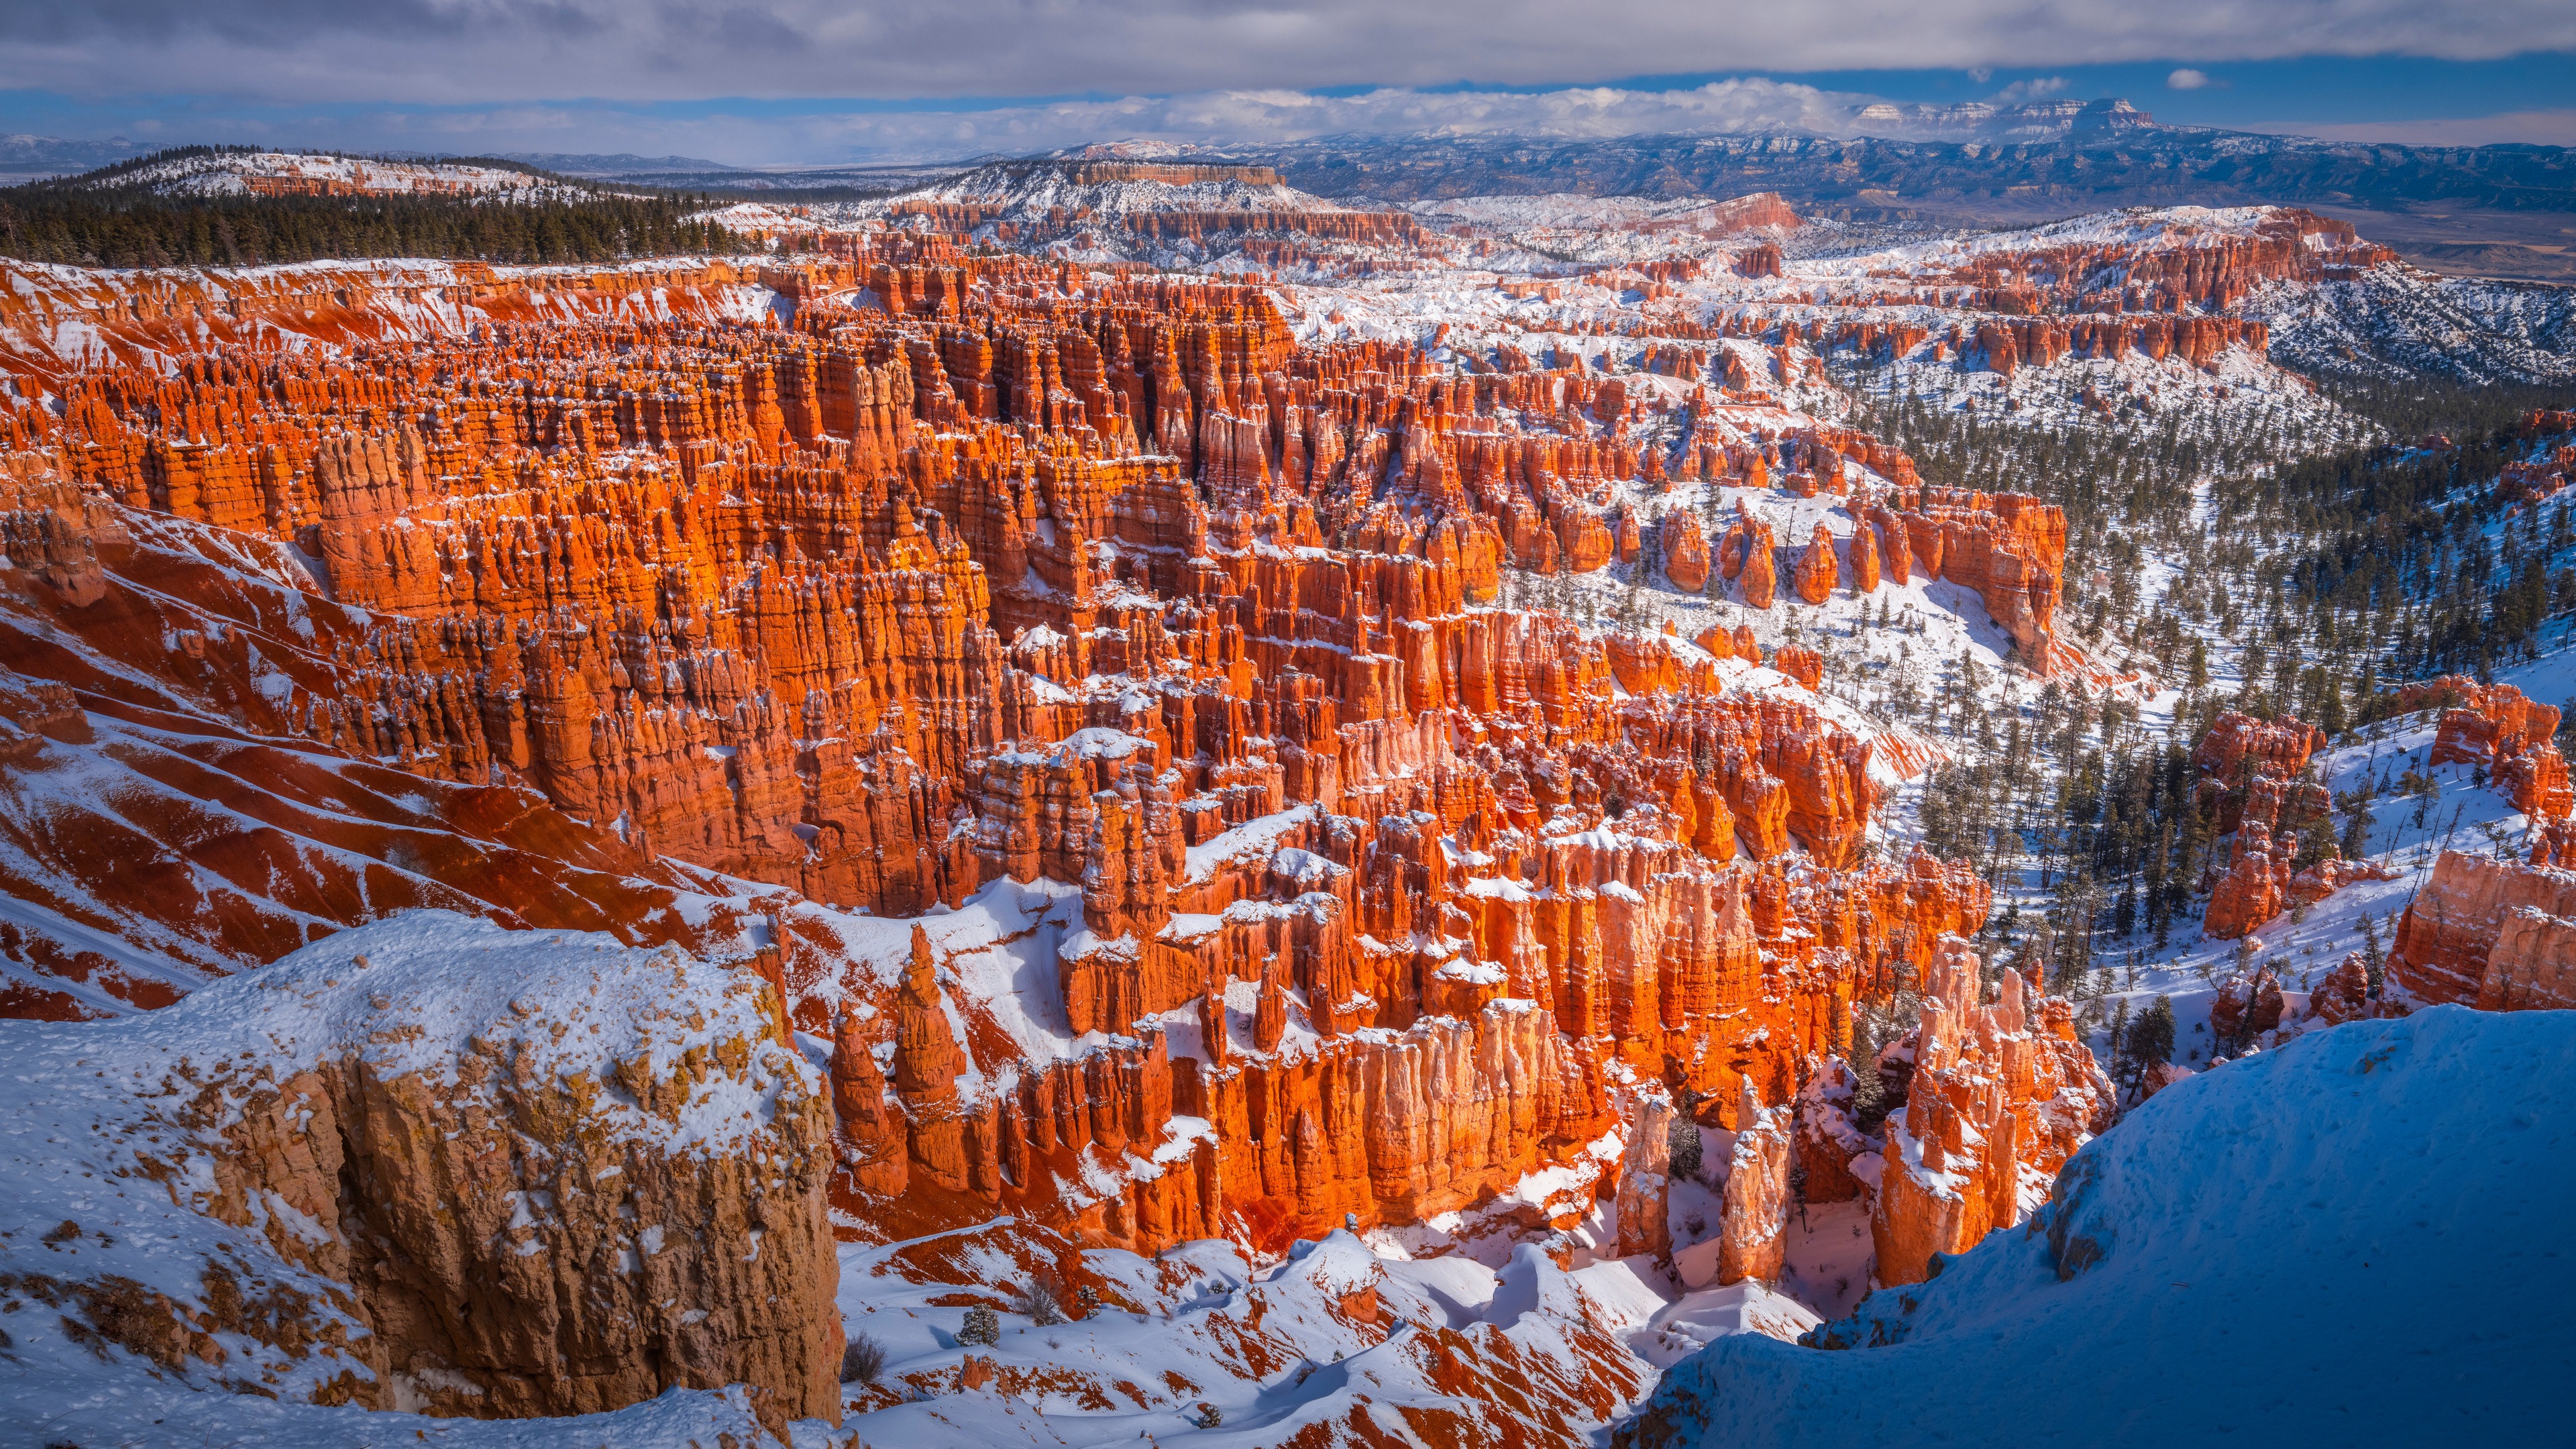 Landscape Nature Winter Snow USA Mountains Rock Formation Grand Canyon Desert Sky Clouds Valley 3840x2160